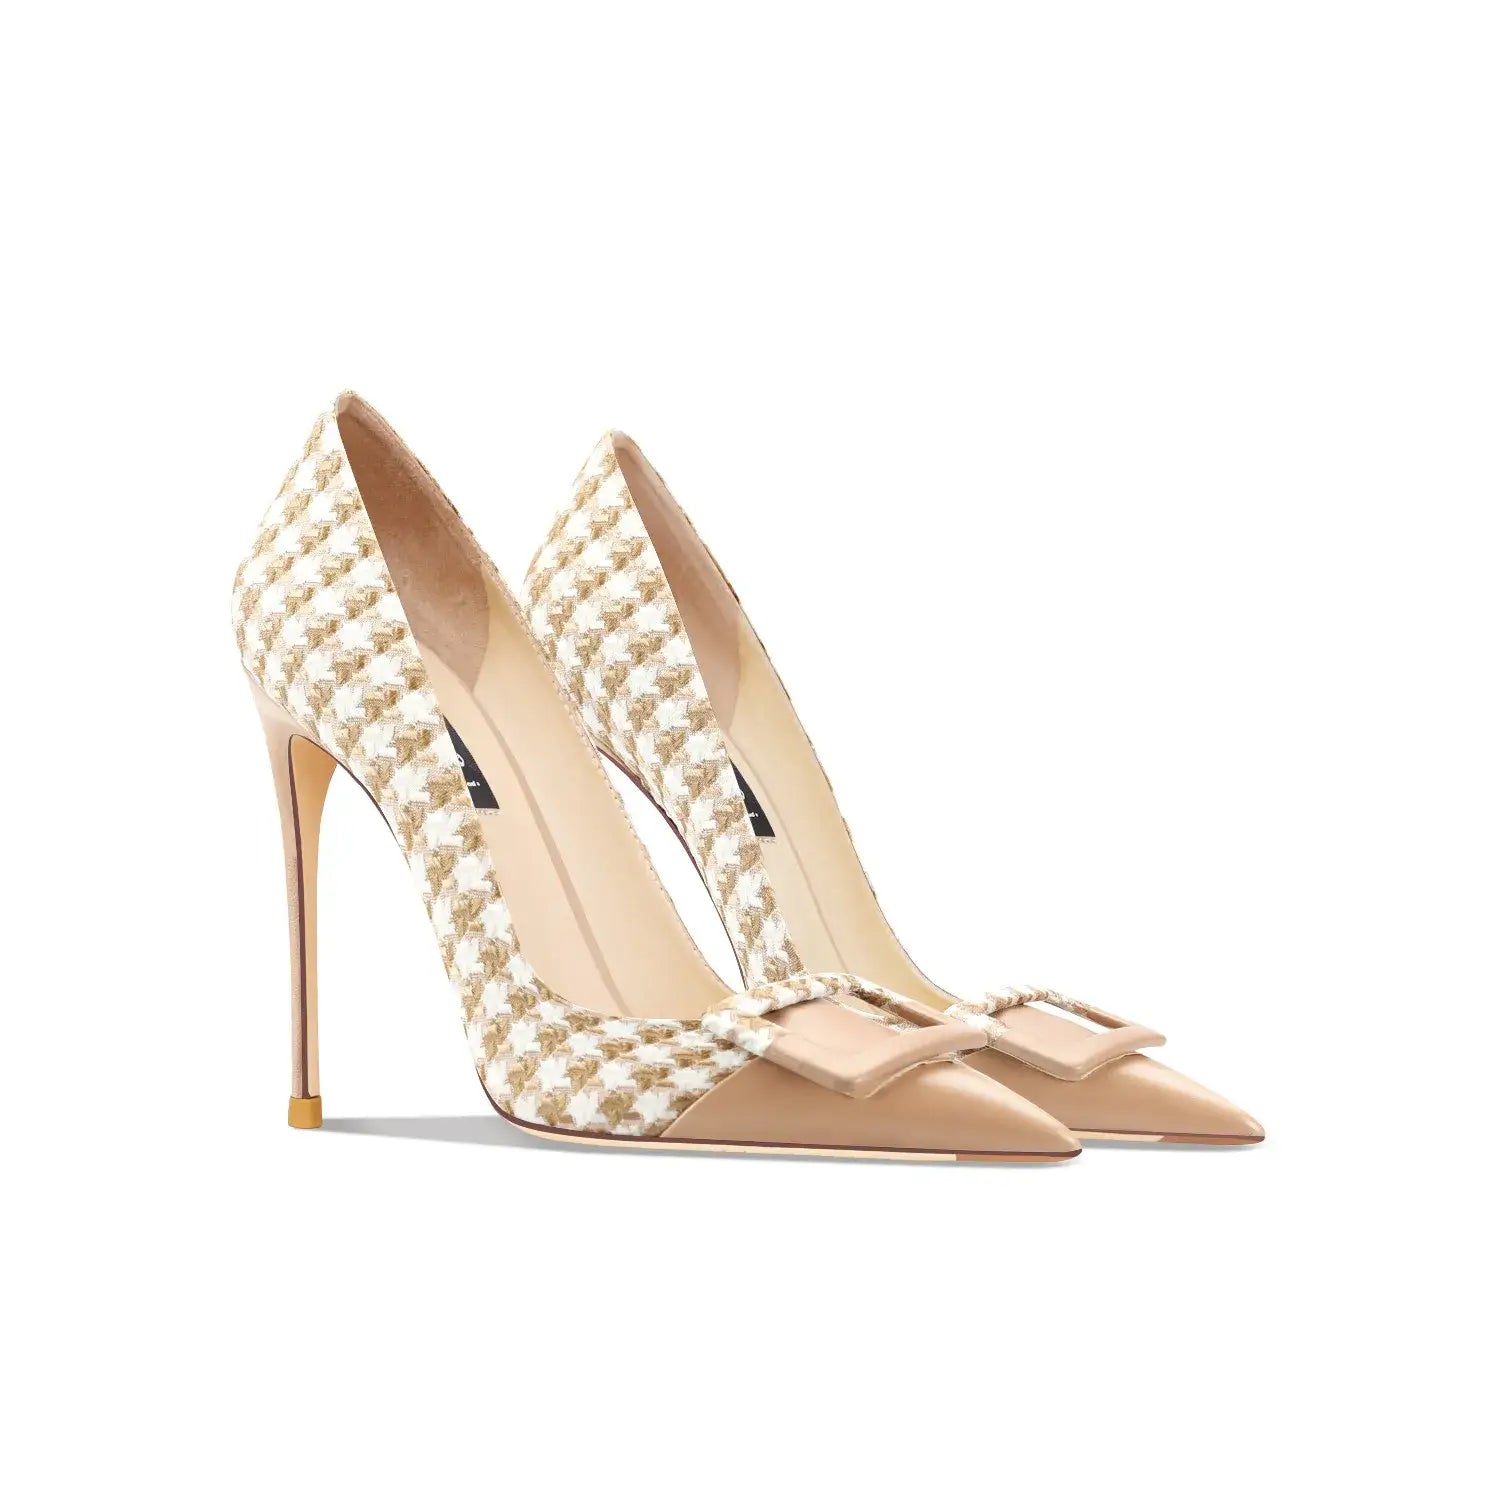 Party pointy high heels pumps - nude 10 cm / 33 / e